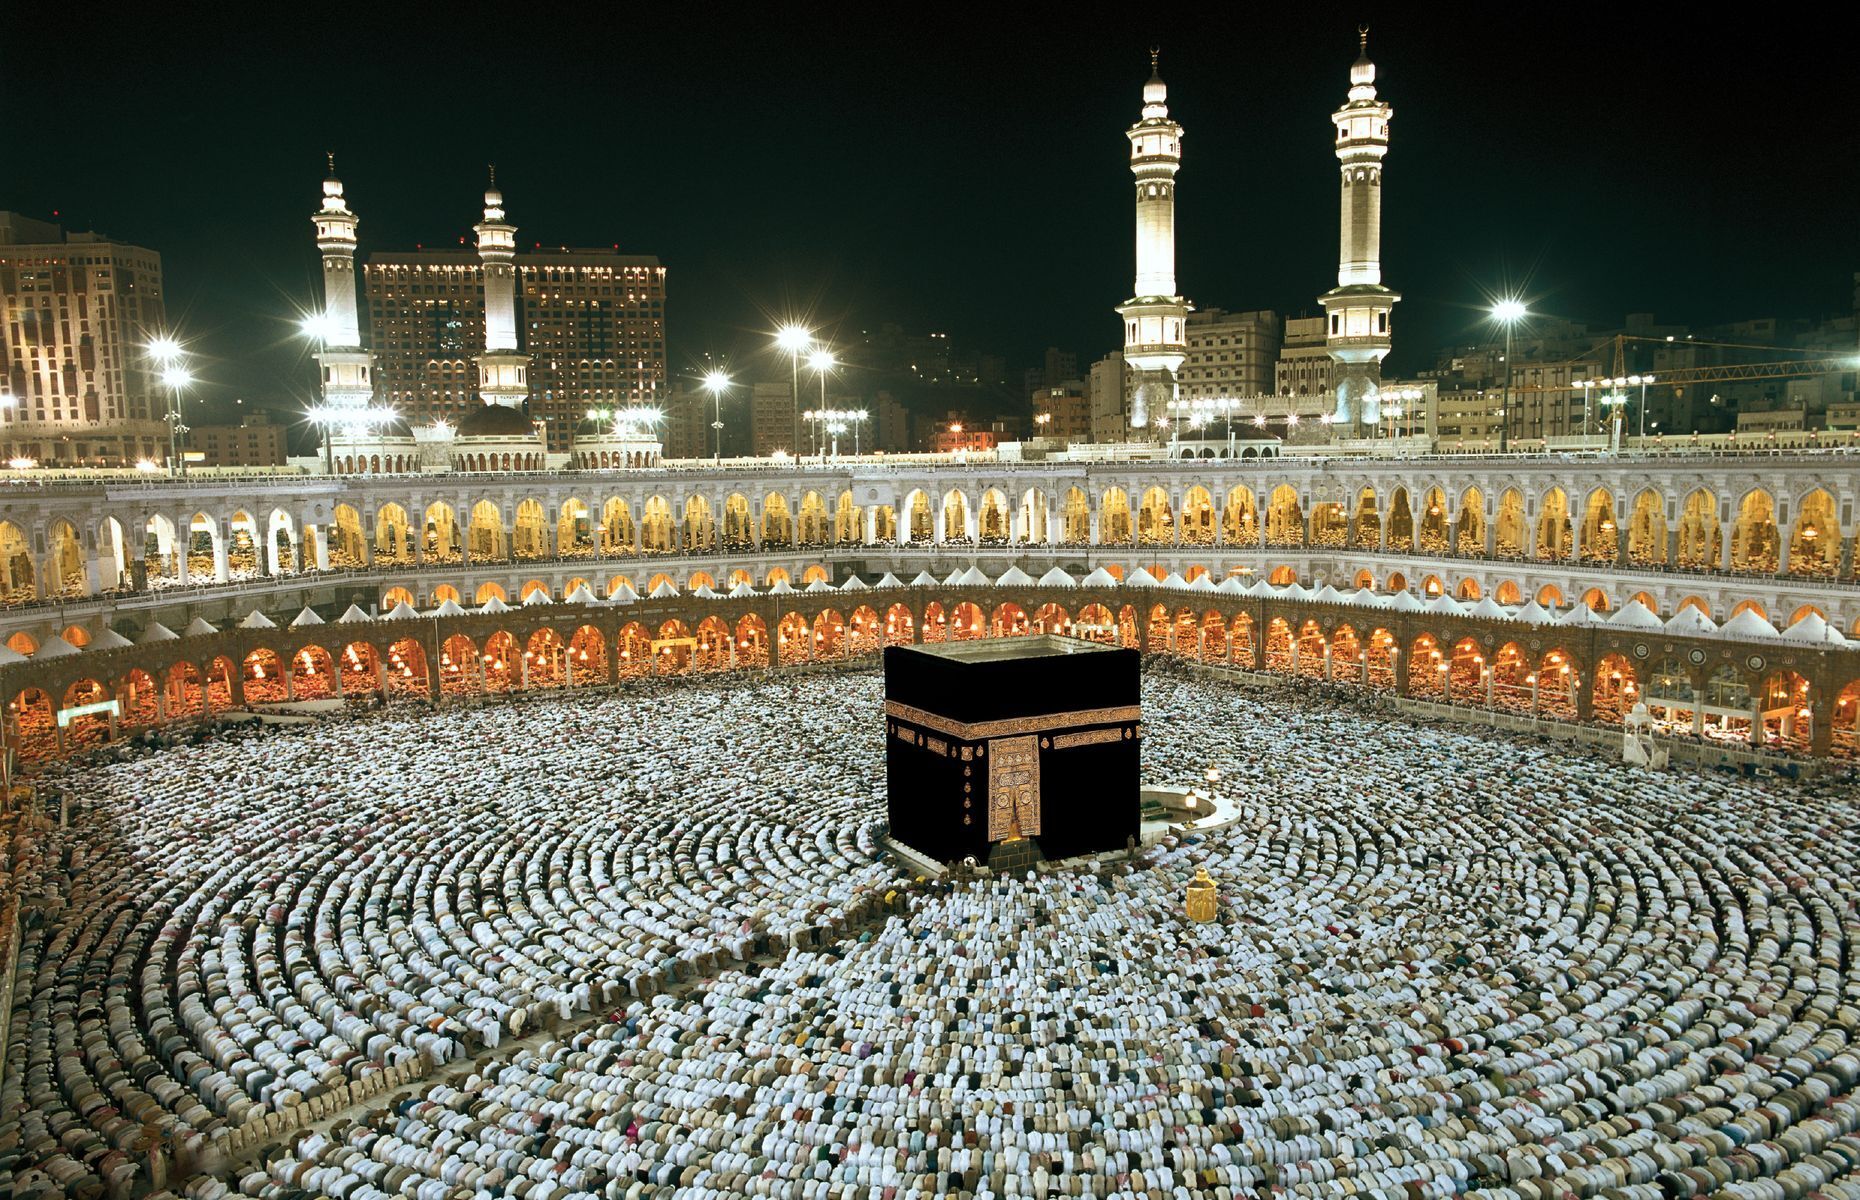 <p>This cubic structure, covered with black silk and located in the centre of the Great Mosque of Mecca, lies at the heart of the annual Muslim pilgrimage known as the Hajj. Spread over three to four days, it’s one of the largest religious gatherings in the world. Before the pandemic, some <a href="https://www.statista.com/statistics/617696/saudi-arabia-total-hajj-pilgrims/" rel="noreferrer noopener">2.5 million Muslims</a> took part in the ritual, while large numbers of other worshippers made their way to the <a href="https://www.britannica.com/topic/Kaaba-shrine-Mecca-Saudi-Arabia" rel="noreferrer noopener">Kaaba</a> throughout the year.</p>